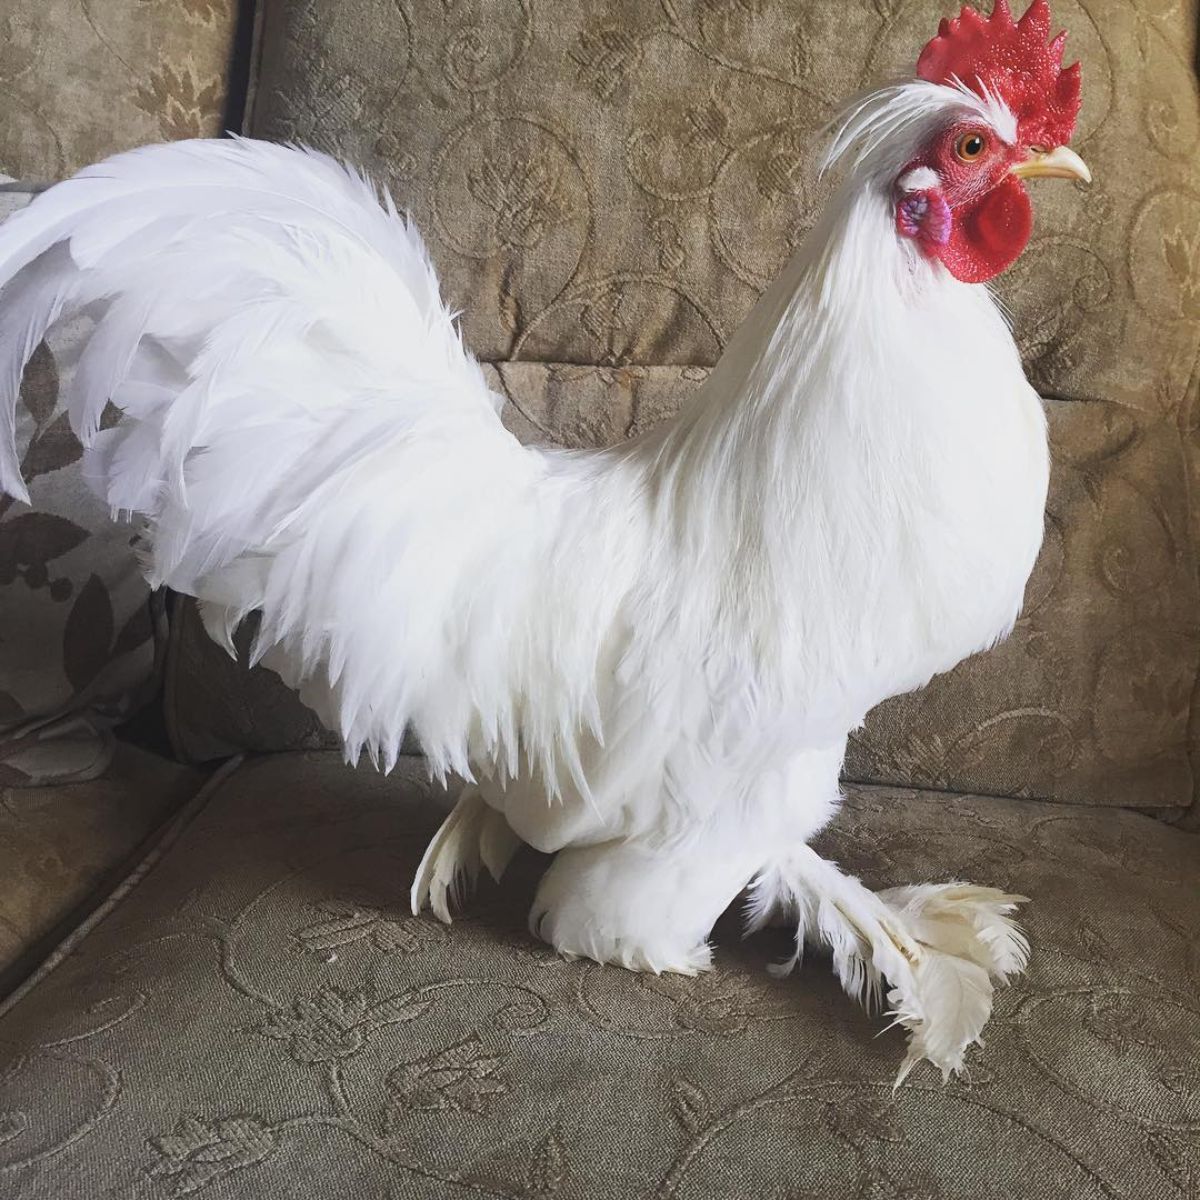 An adorable Burmese Bantam rooster perched on a couch.